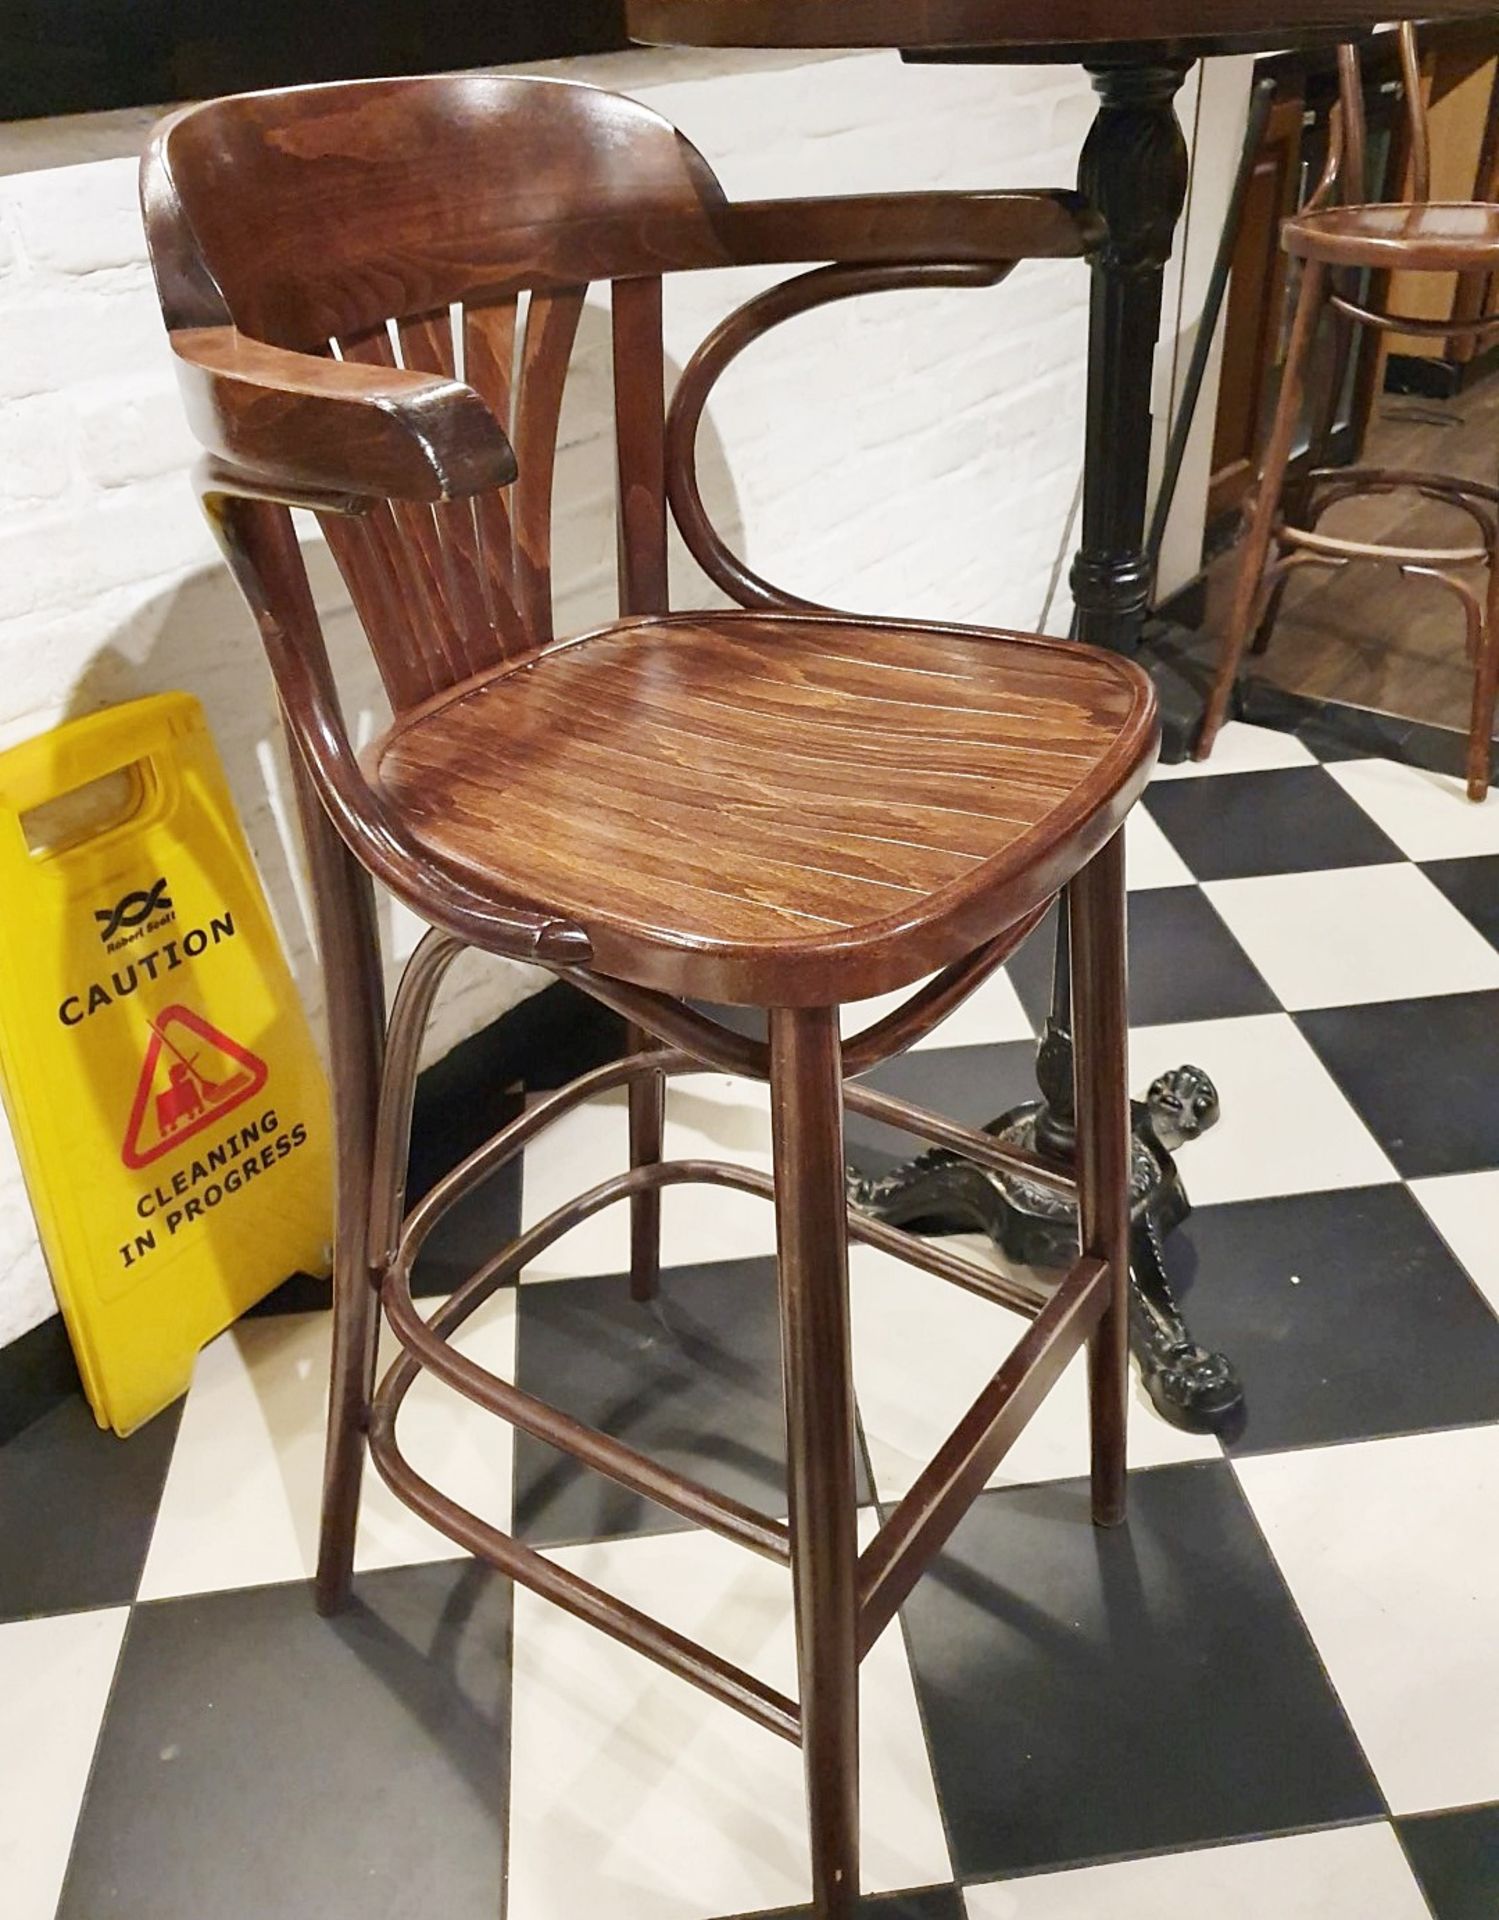 2 x Wooden Bar Stools With Backs, Armrests and Foot Bar - H65/19 x W55 x D40 cms - Ref PA139 - CL463 - Image 2 of 4